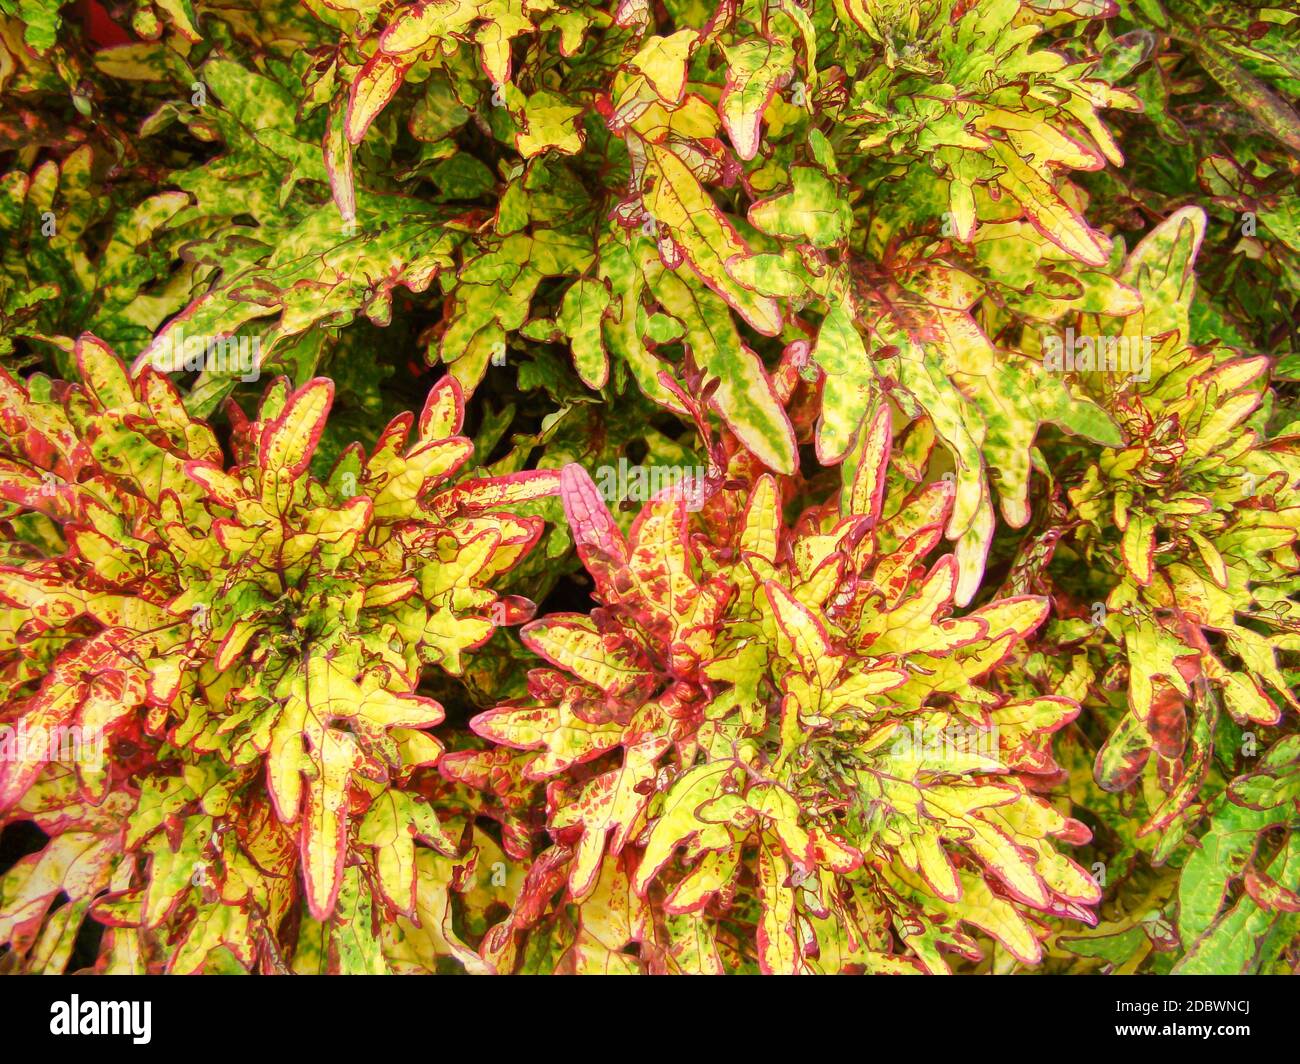 Red yellow leaves of the coleus plant, Plectranthus scutellarioides Stock Photo